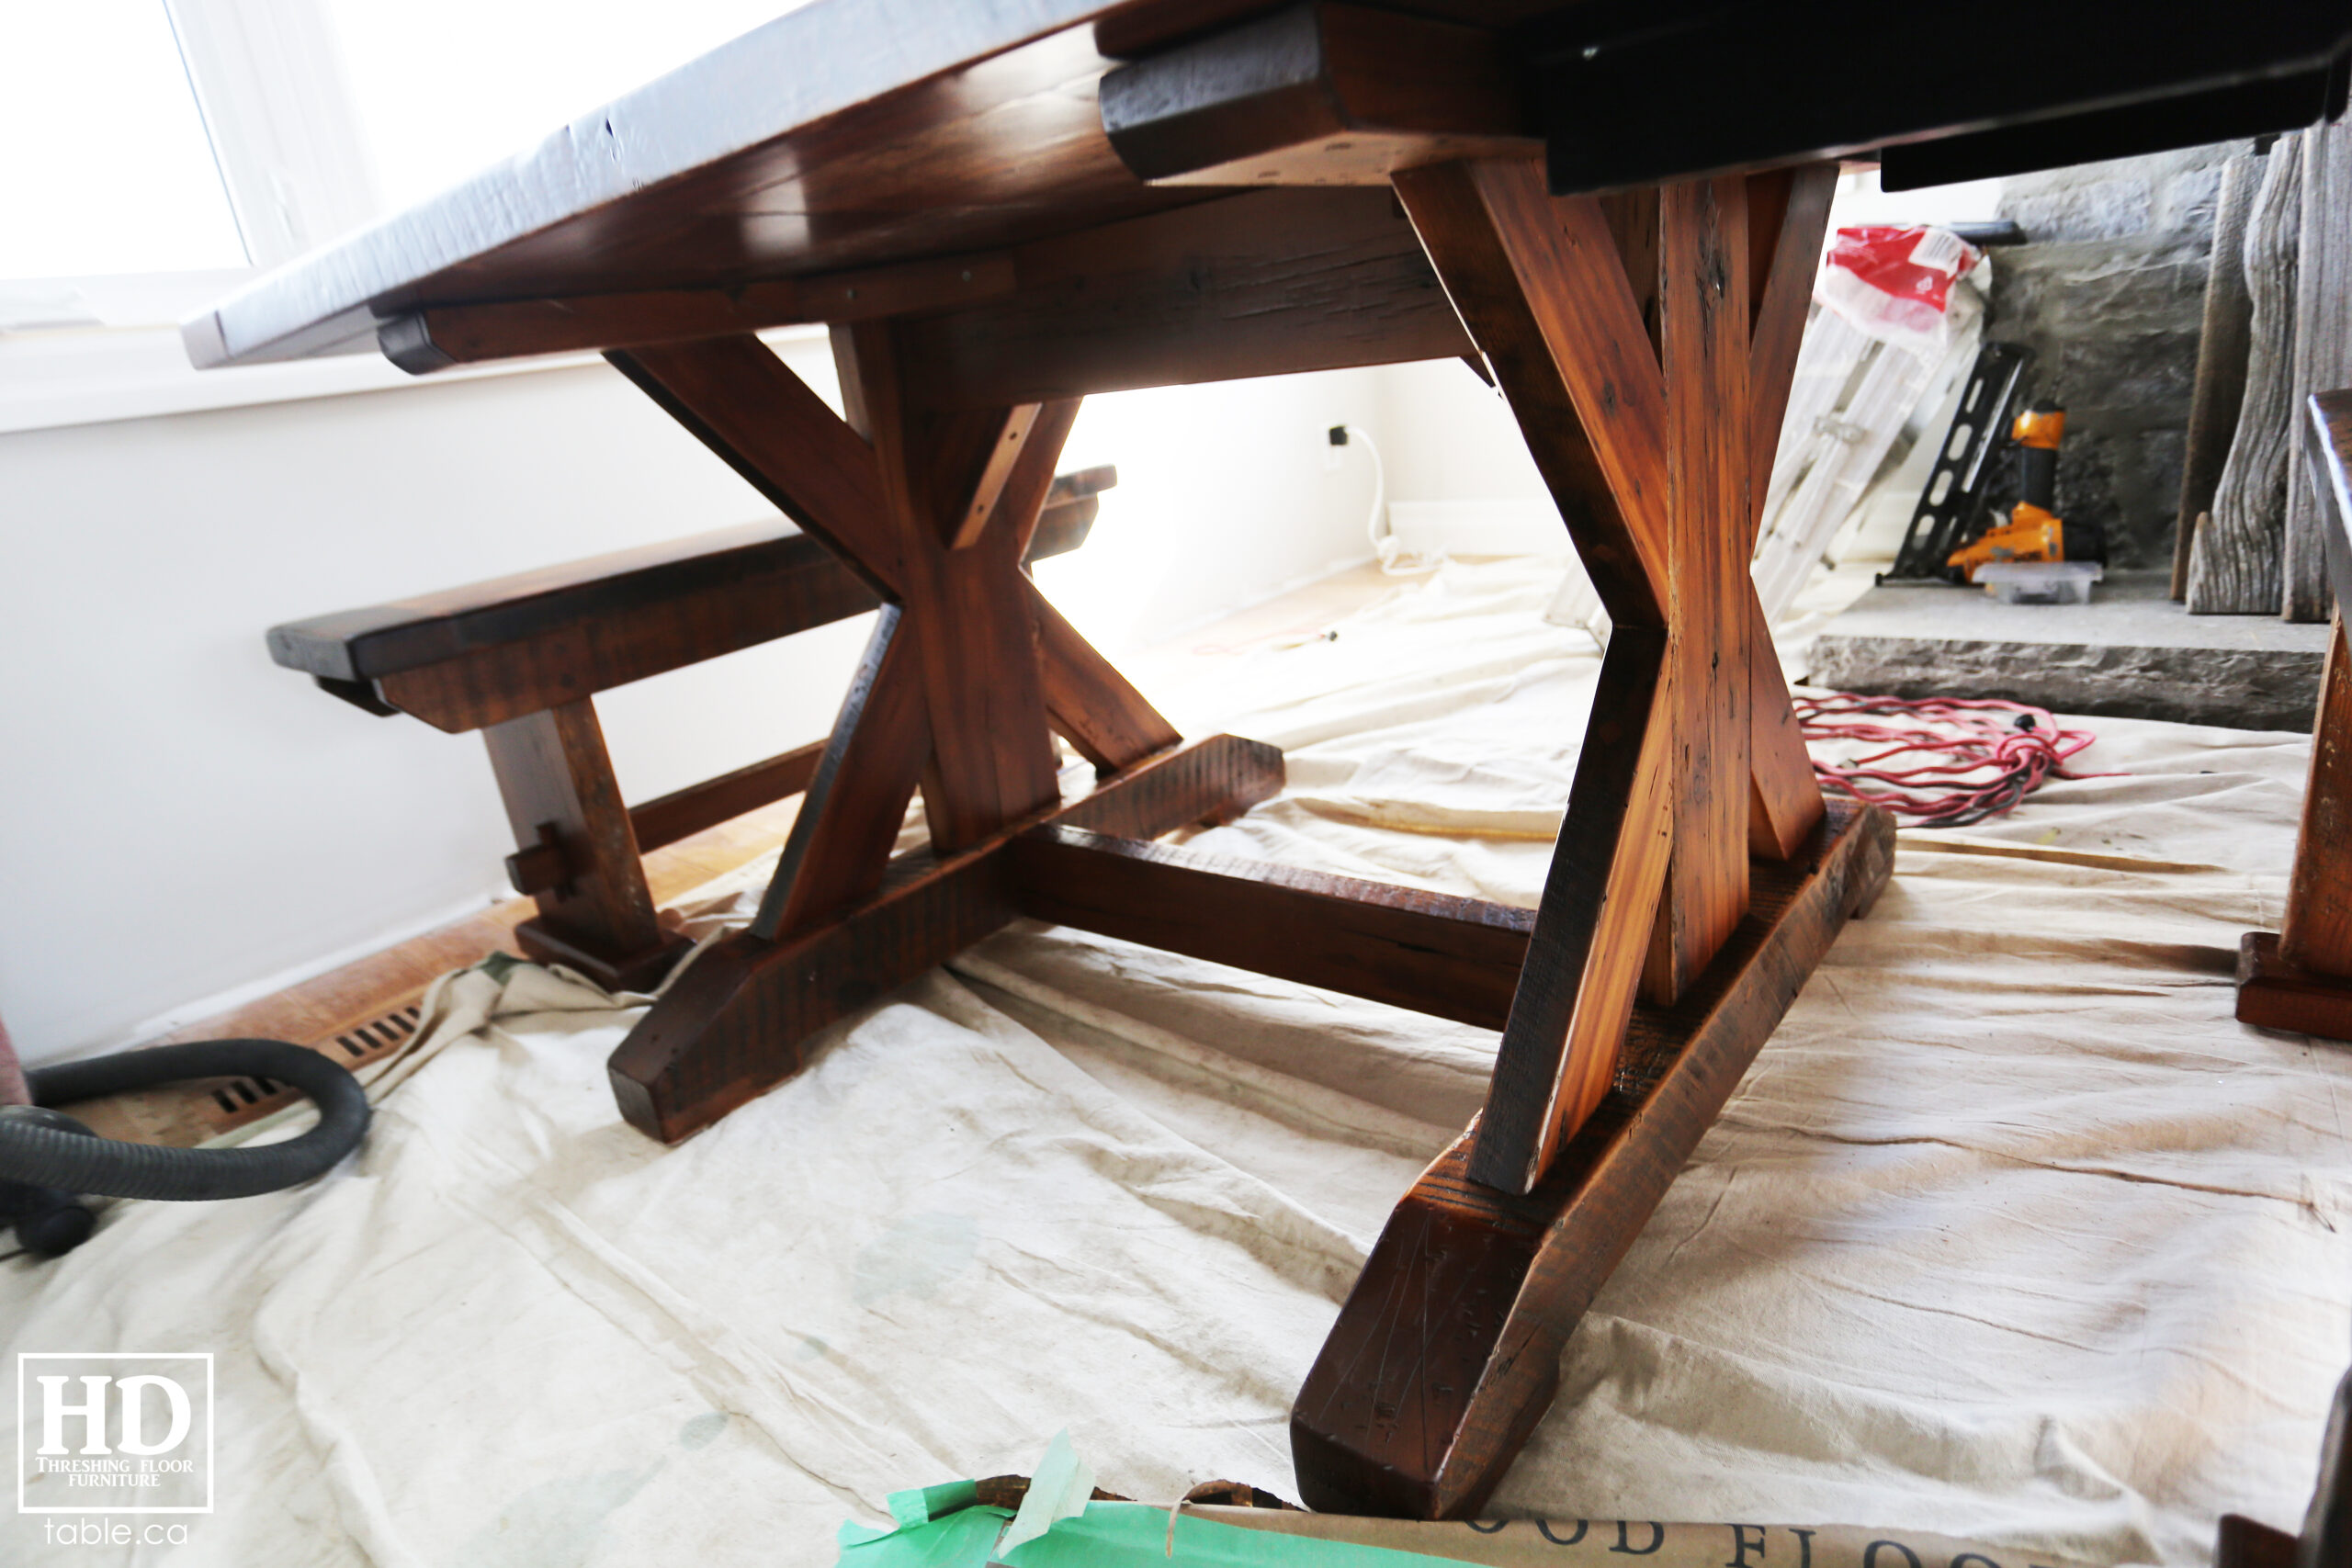 Antique Wood Table by HD Threshing Floor Furniture / www.table.ca